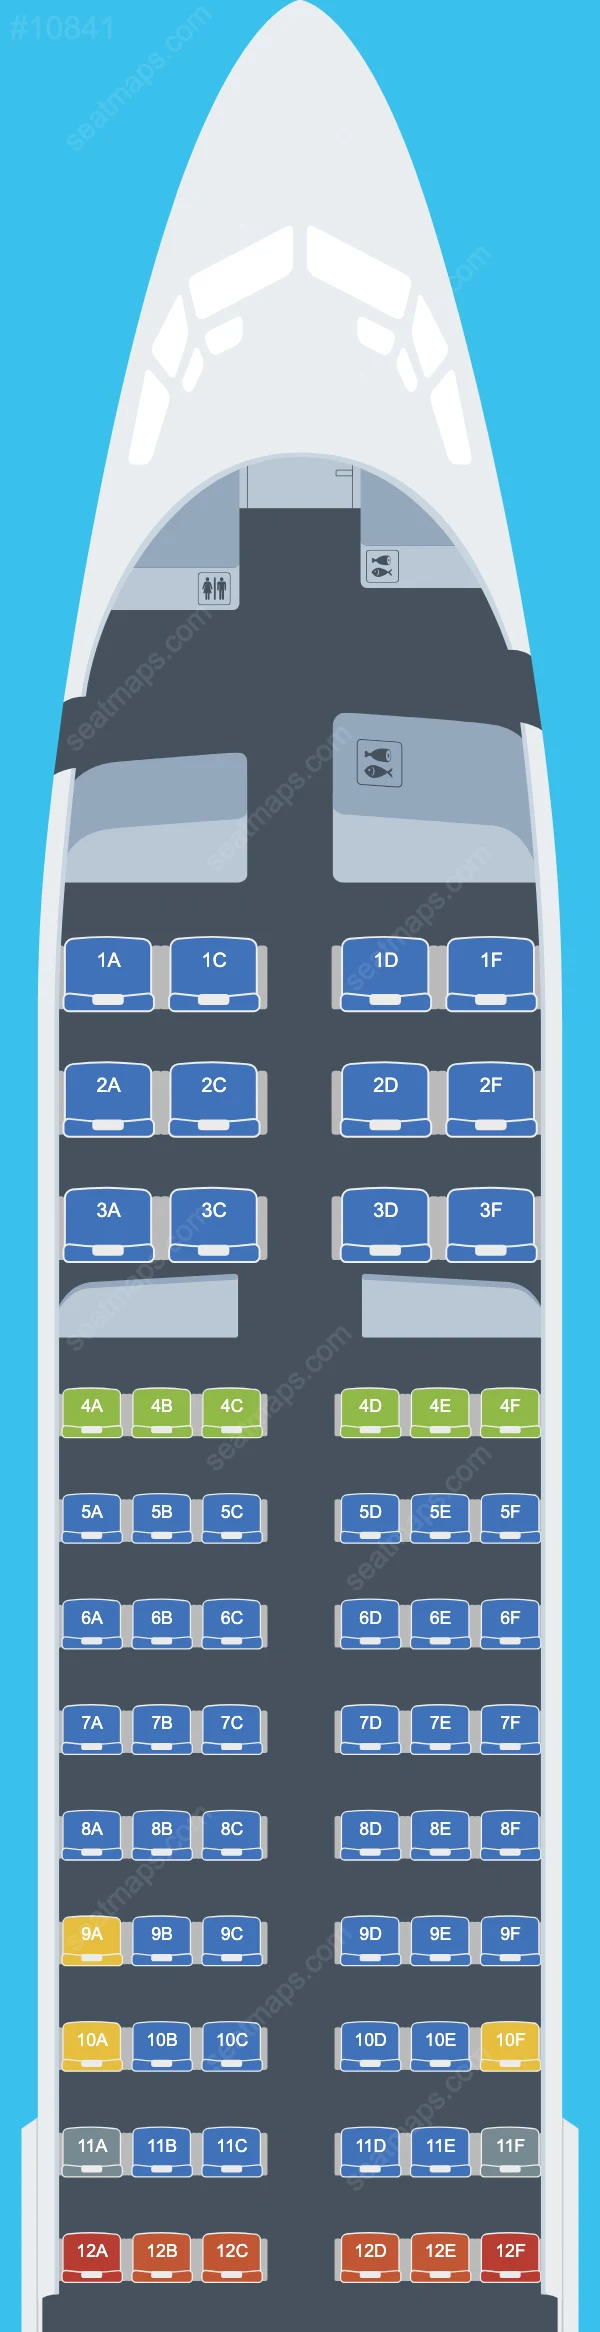 Malaysia Airlines Boeing 737 Seat Maps 737-800 V.2